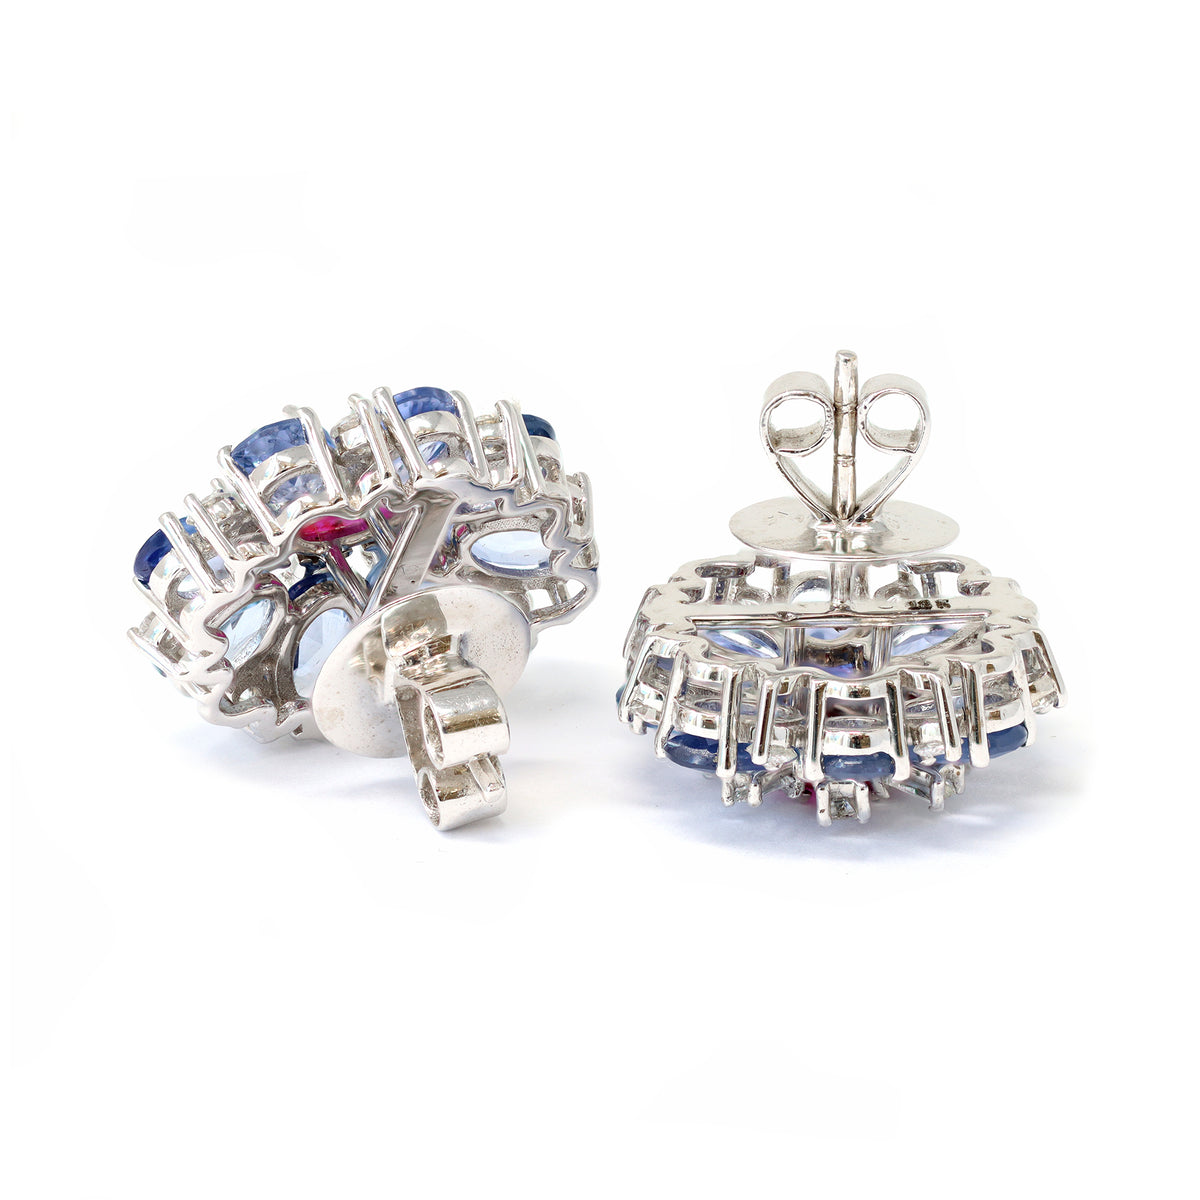 sapphire-diamond-and-ruby-earrings-set-in-18-karat-white-gold-front-and-back-view-2000x2000.jpg